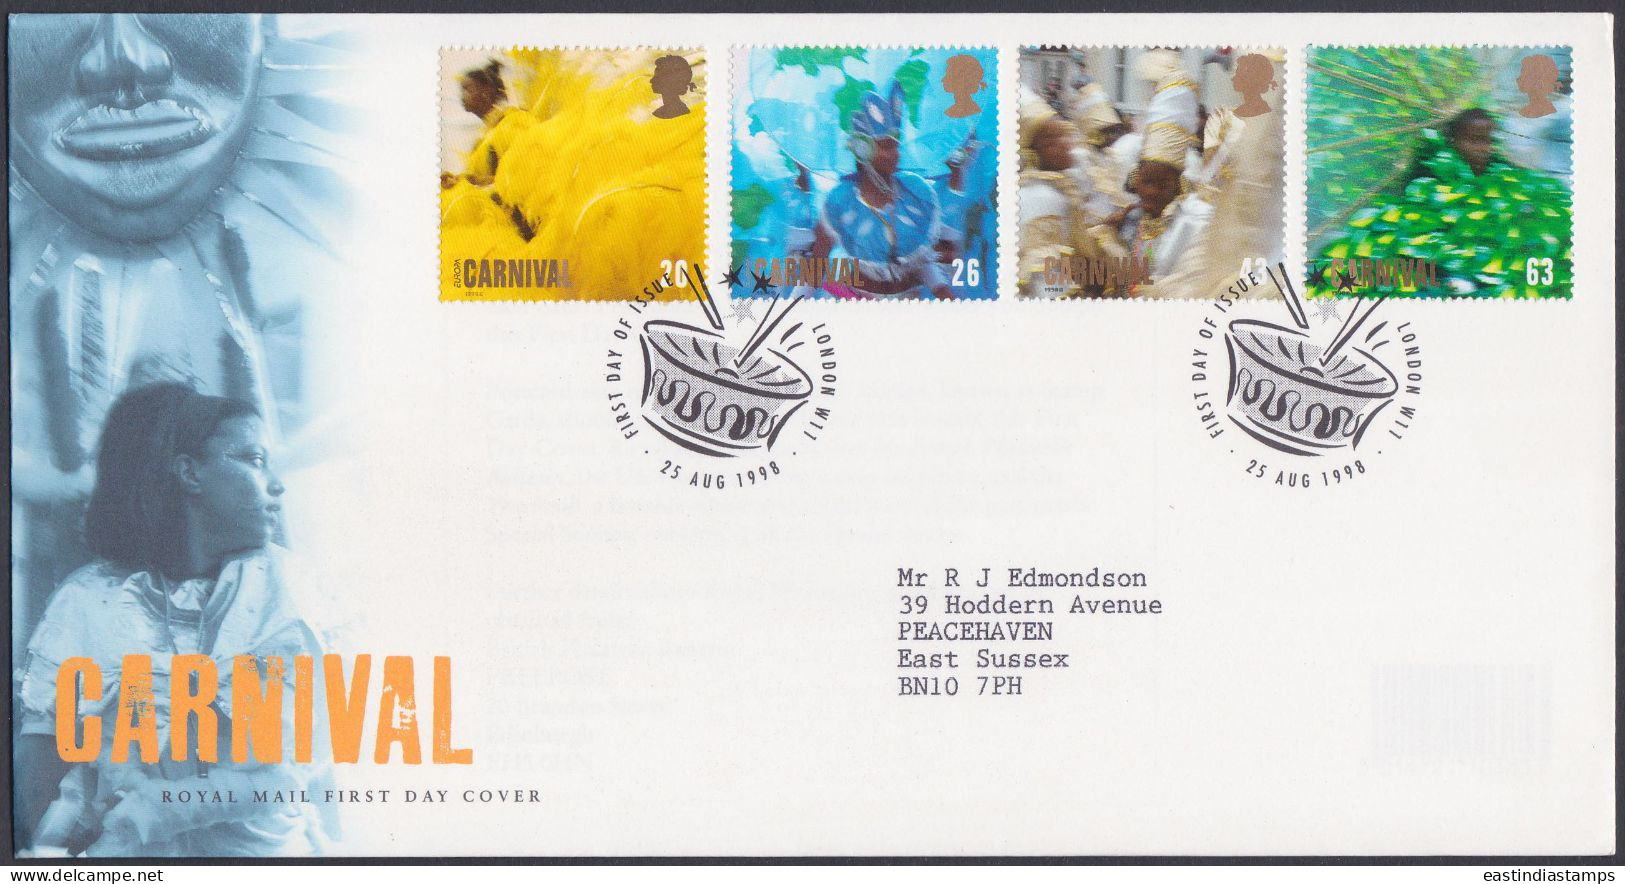 GB Great Britain 1998 FDC Carnival, Festival, Revelry, Music, Culture, Pictorial Postmark, First Day Cover - Briefe U. Dokumente